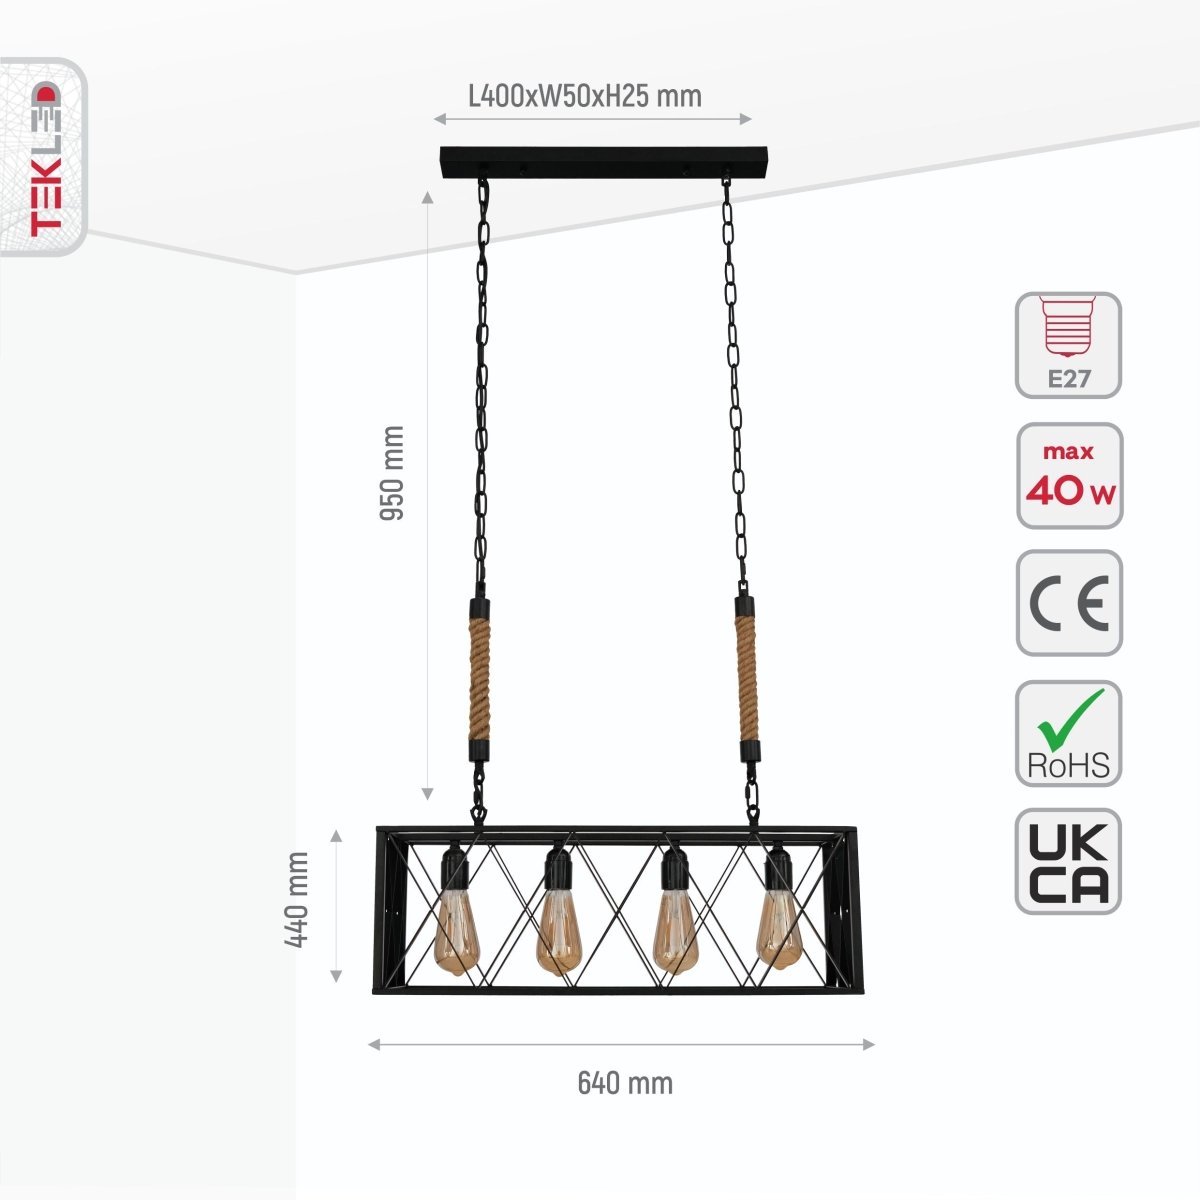 Size and specs of Black Cuboid Metal Island Chandelier with 4xE27 Fitting | TEKLED 158-17870